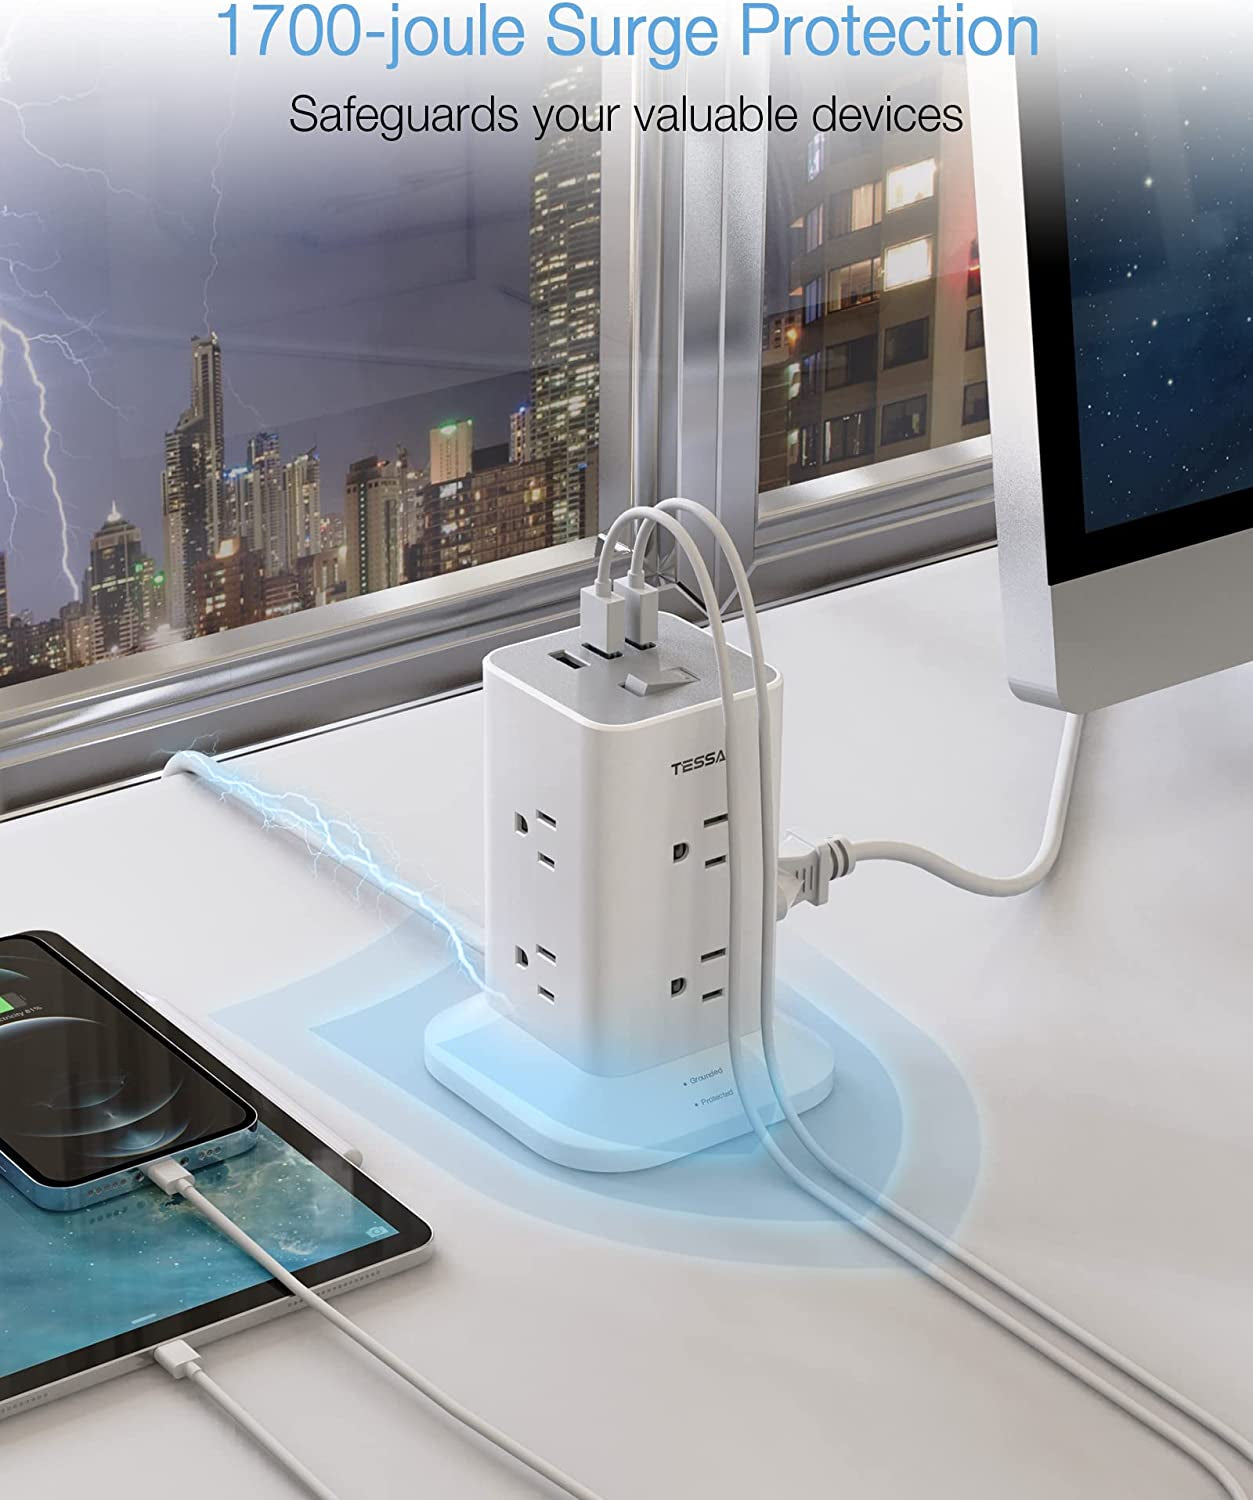 Multi-Outlet Power Strip Tower with Surge Protection, USB Ports, and Extension Cord - Ideal for Office, Dorm, or Home Uses